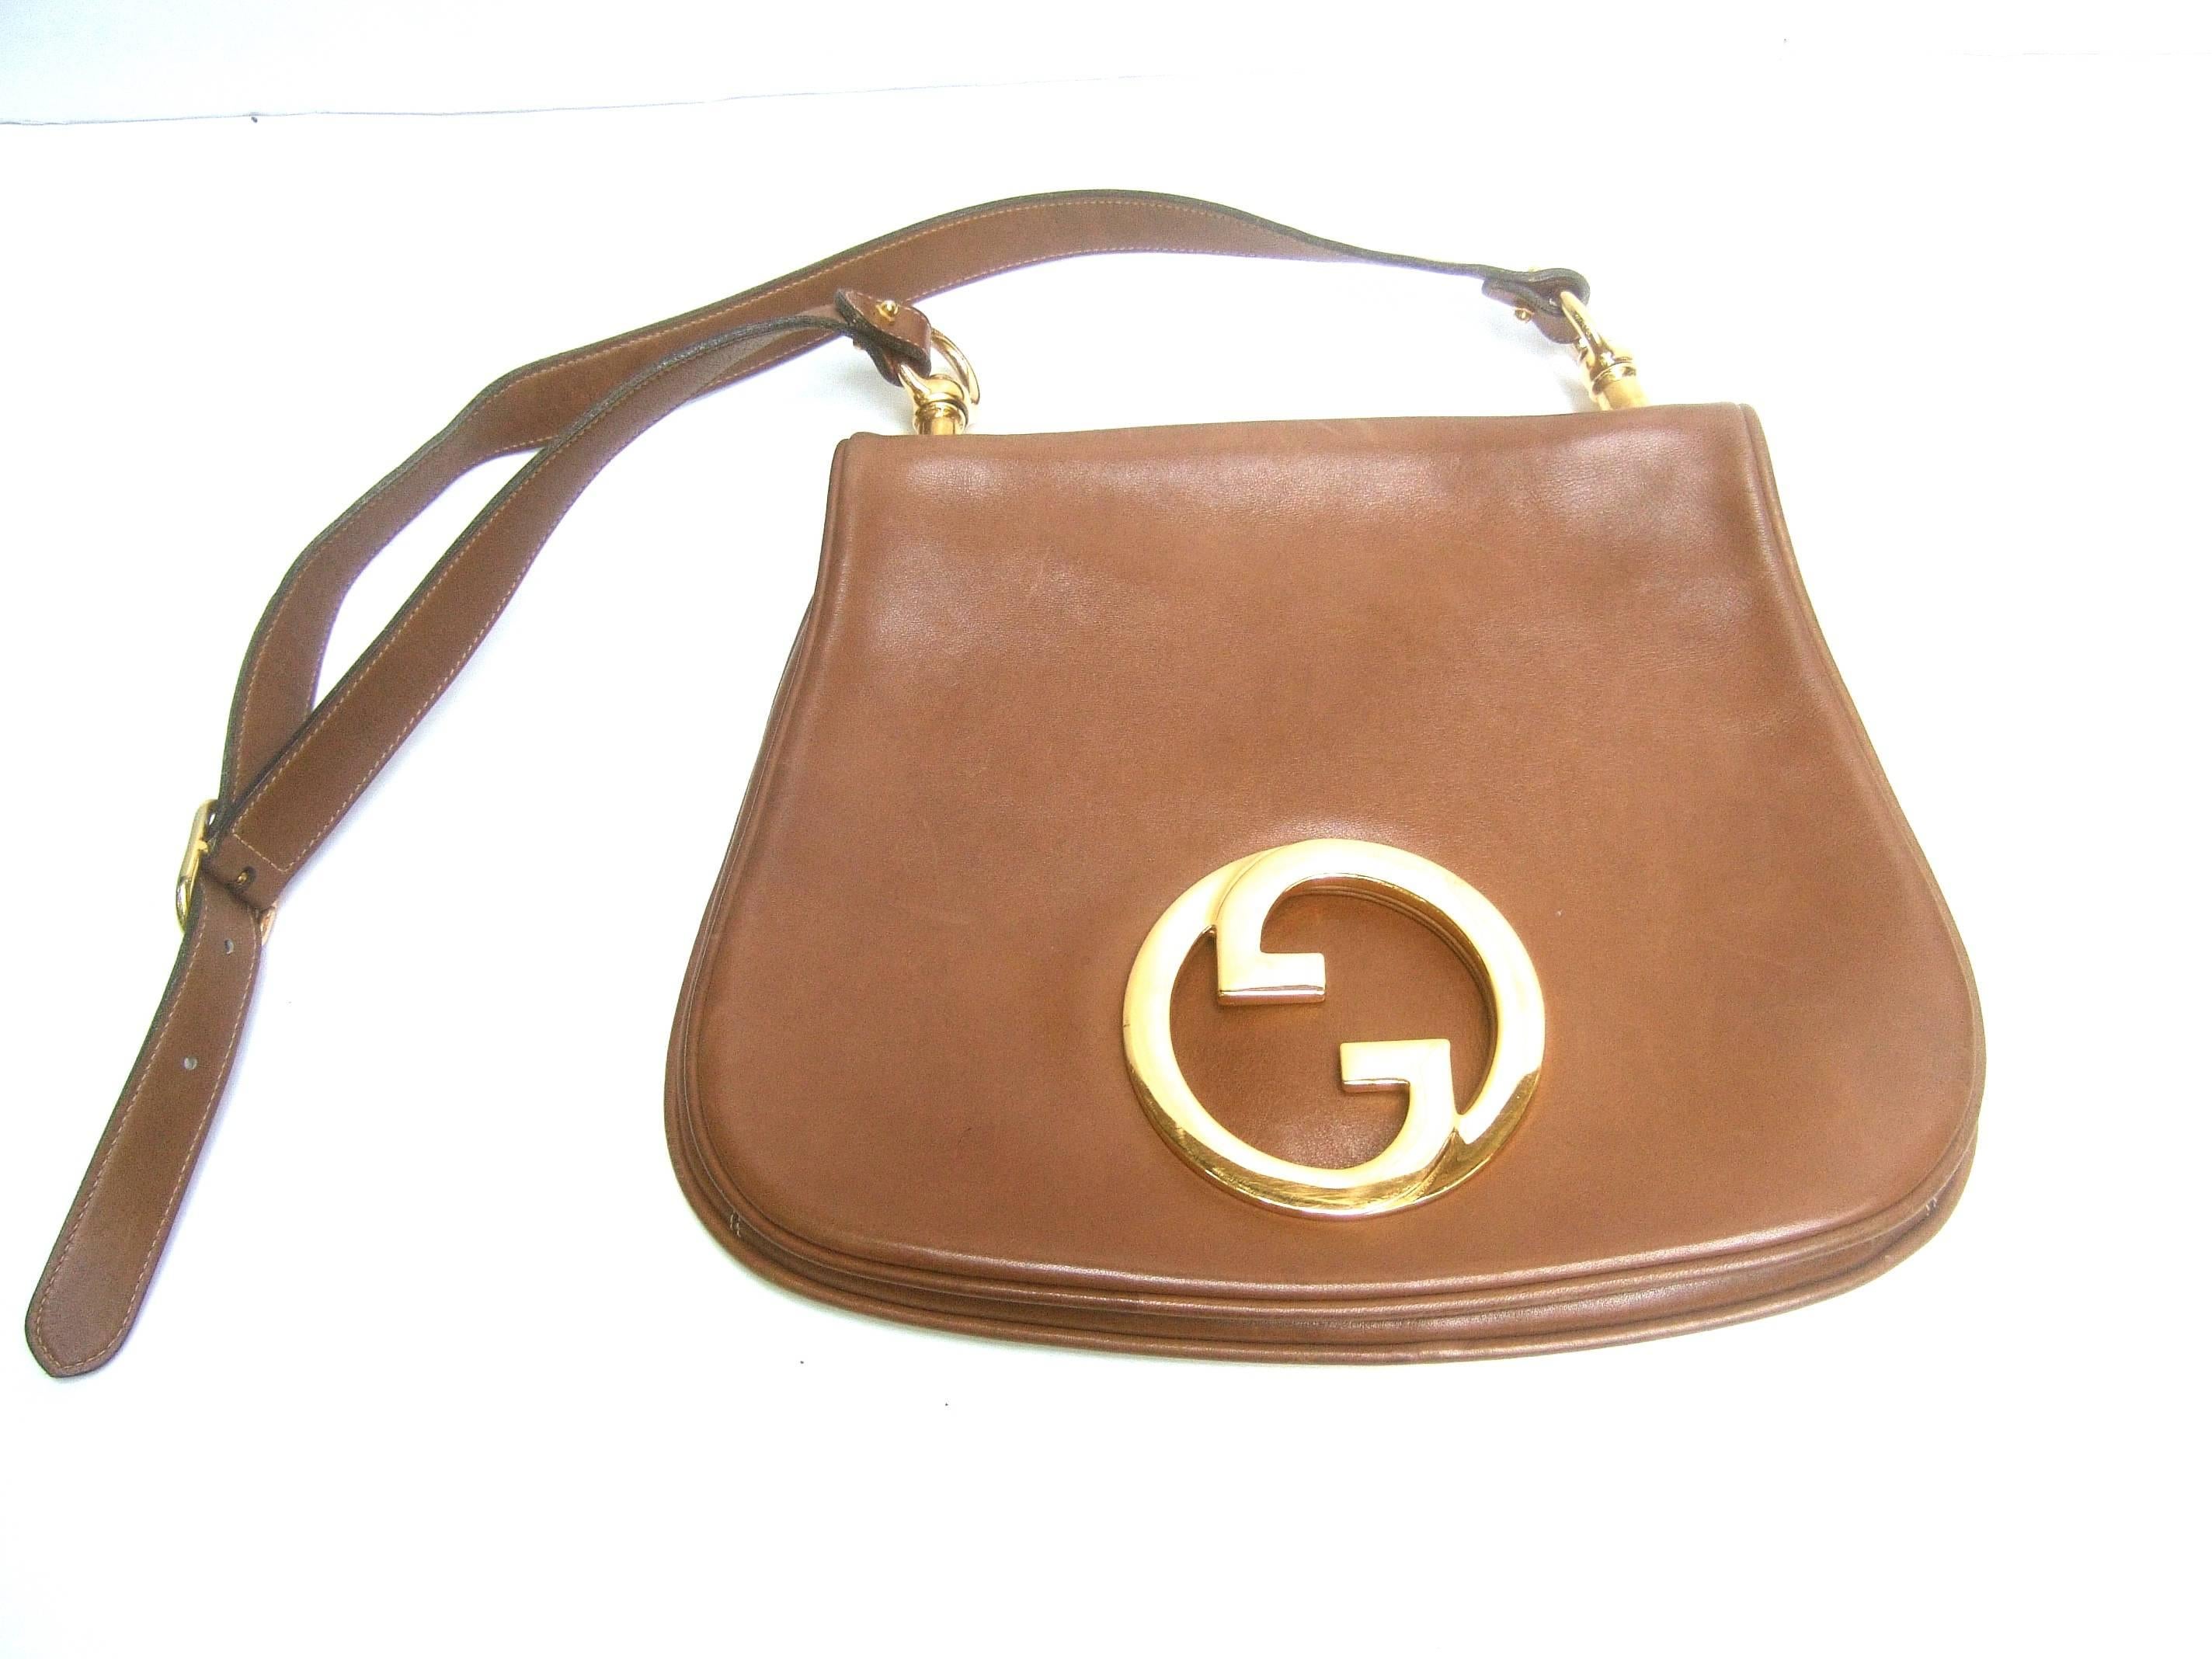 Gucci Italy caramel brown leather blondie shoulder bag c 1970s 
The rare Gucci shoulder bag is designed with supple 
light brown leather

Adorned with Gucci's sleek massive gilt metal 
interlocked initials. Suspended from gilt metal 
hinges.